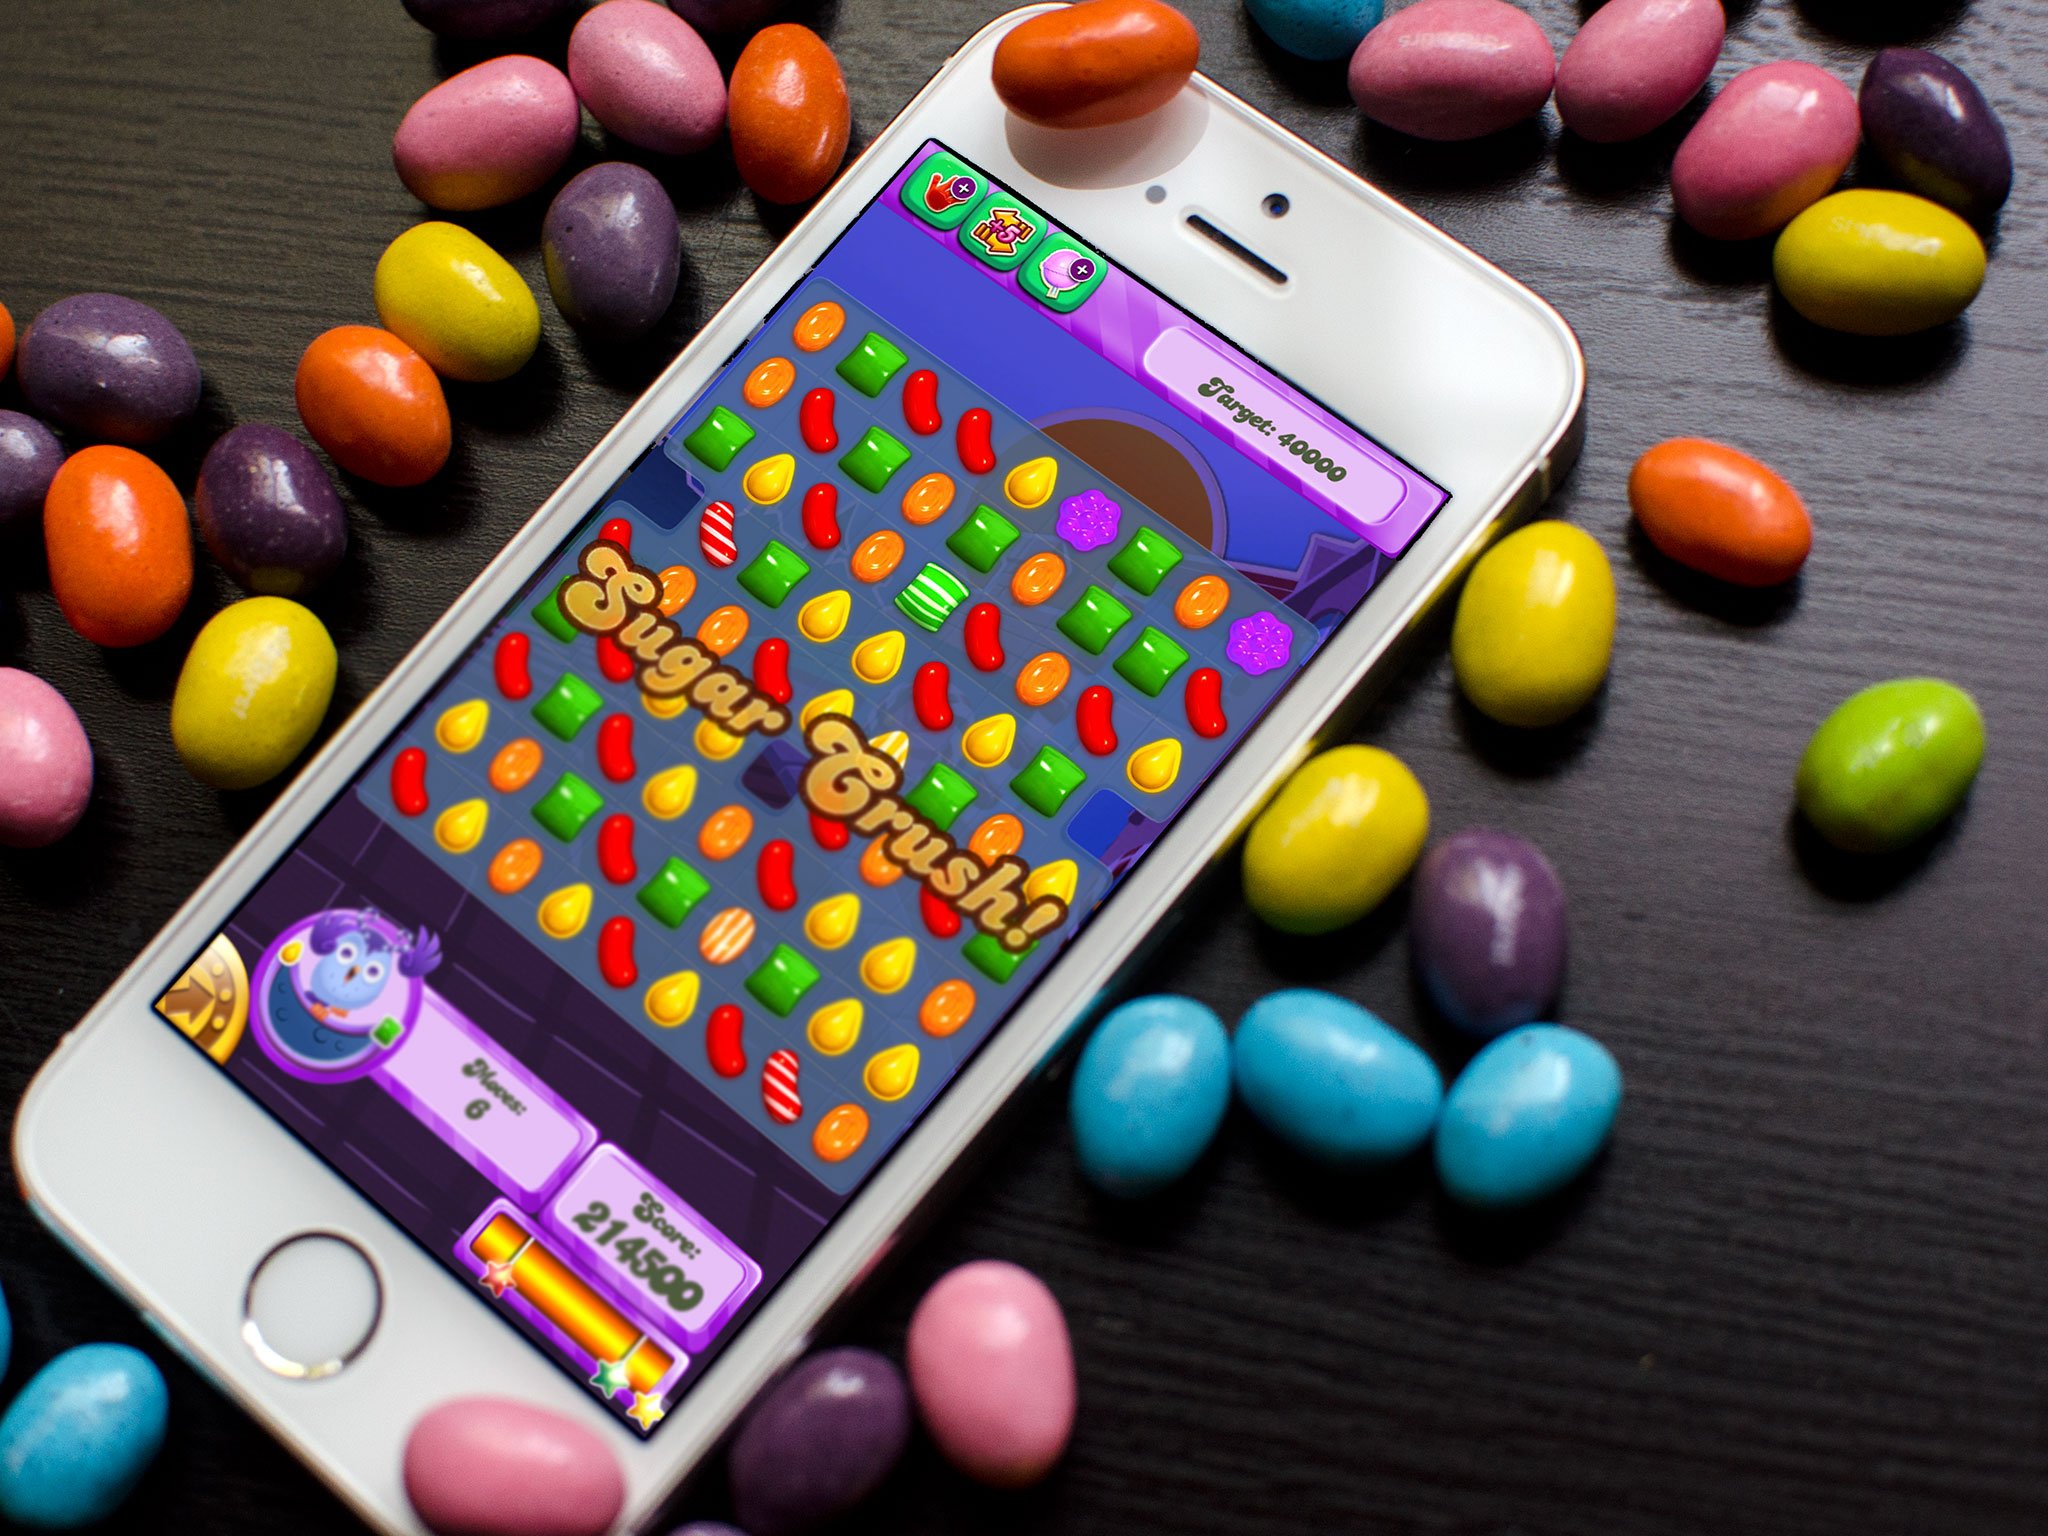 New and updated apps: Fantastical 2, Vine, Candy Crush Saga